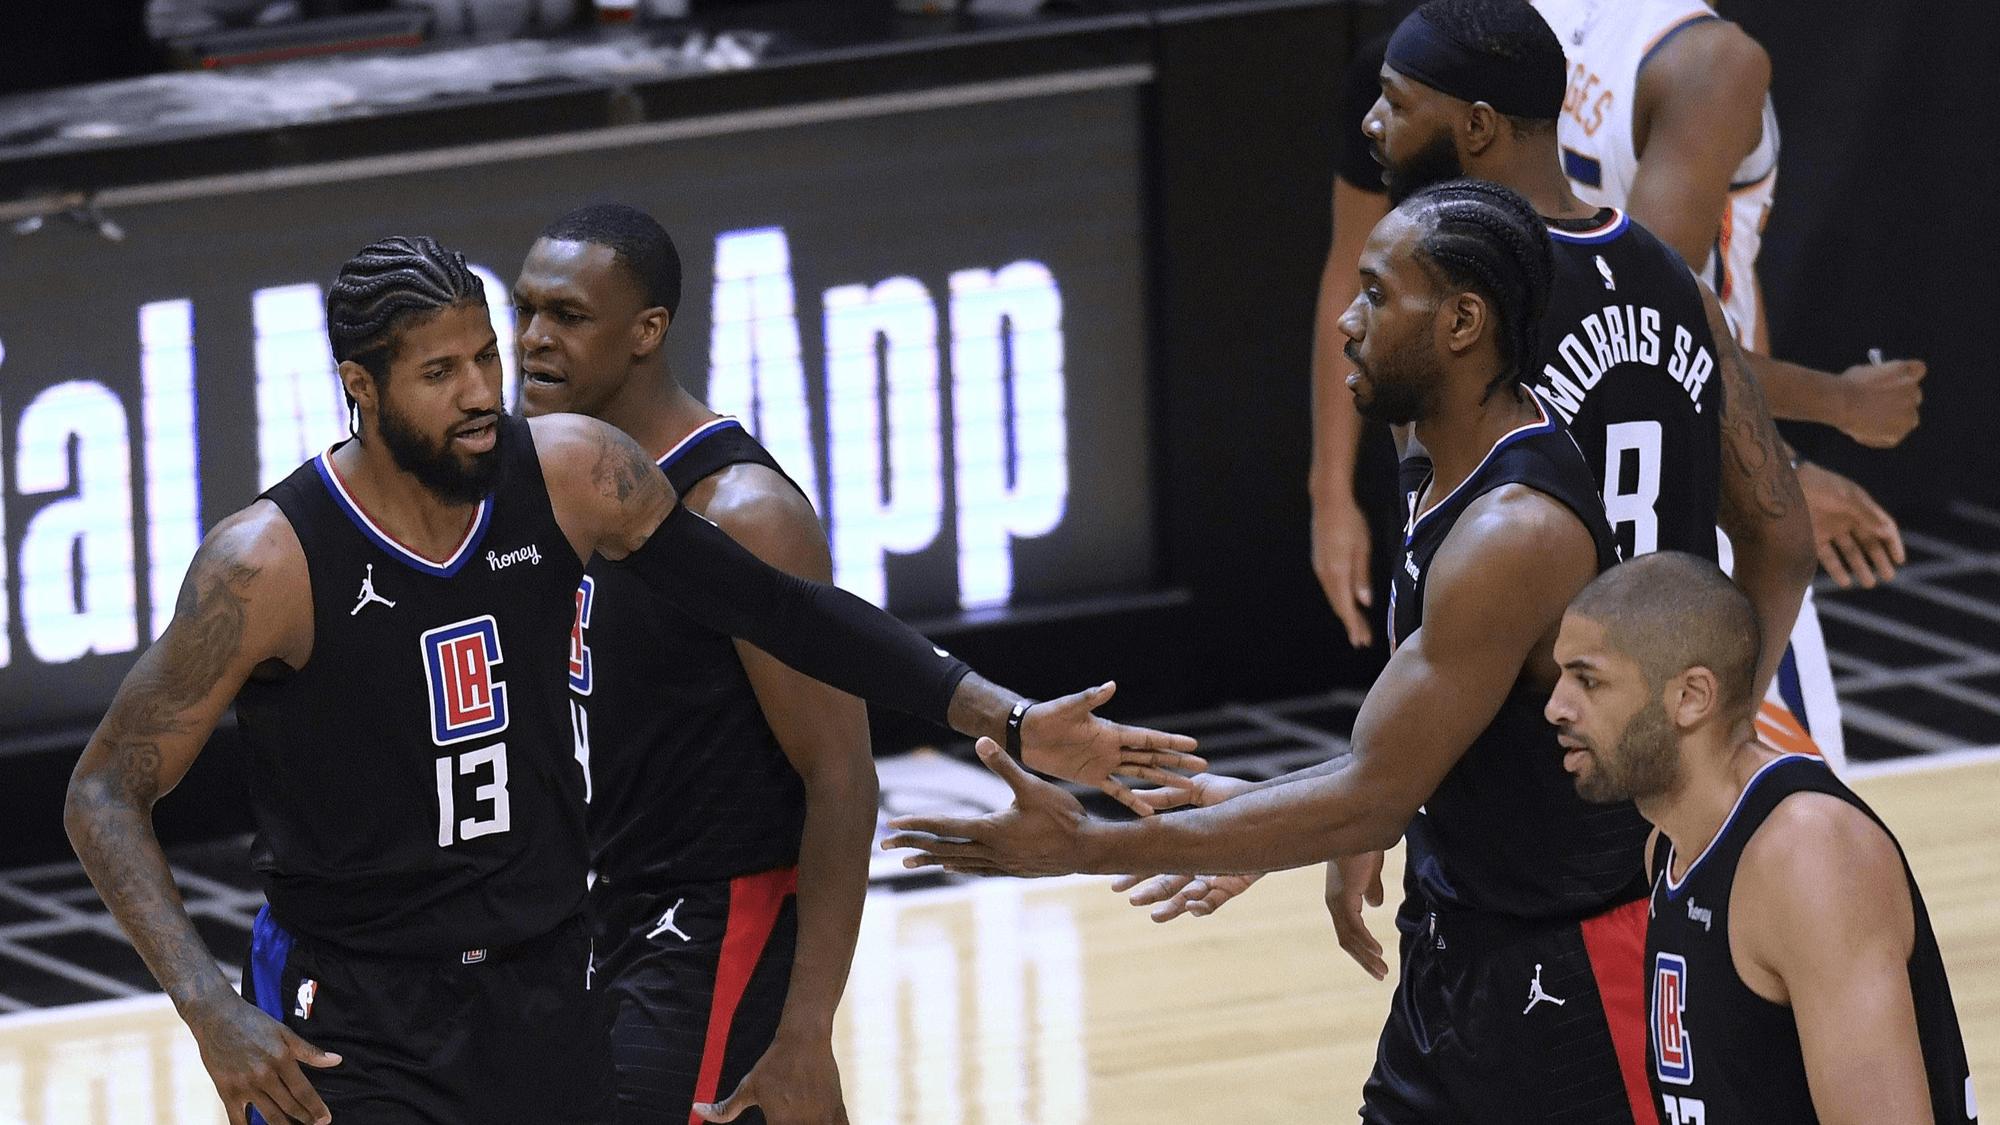 Los Angeles Clippers vs Phoenix Suns Preview: Clippers’ Perimeter Prowess Provides Prime Underdog Value in Phoenix